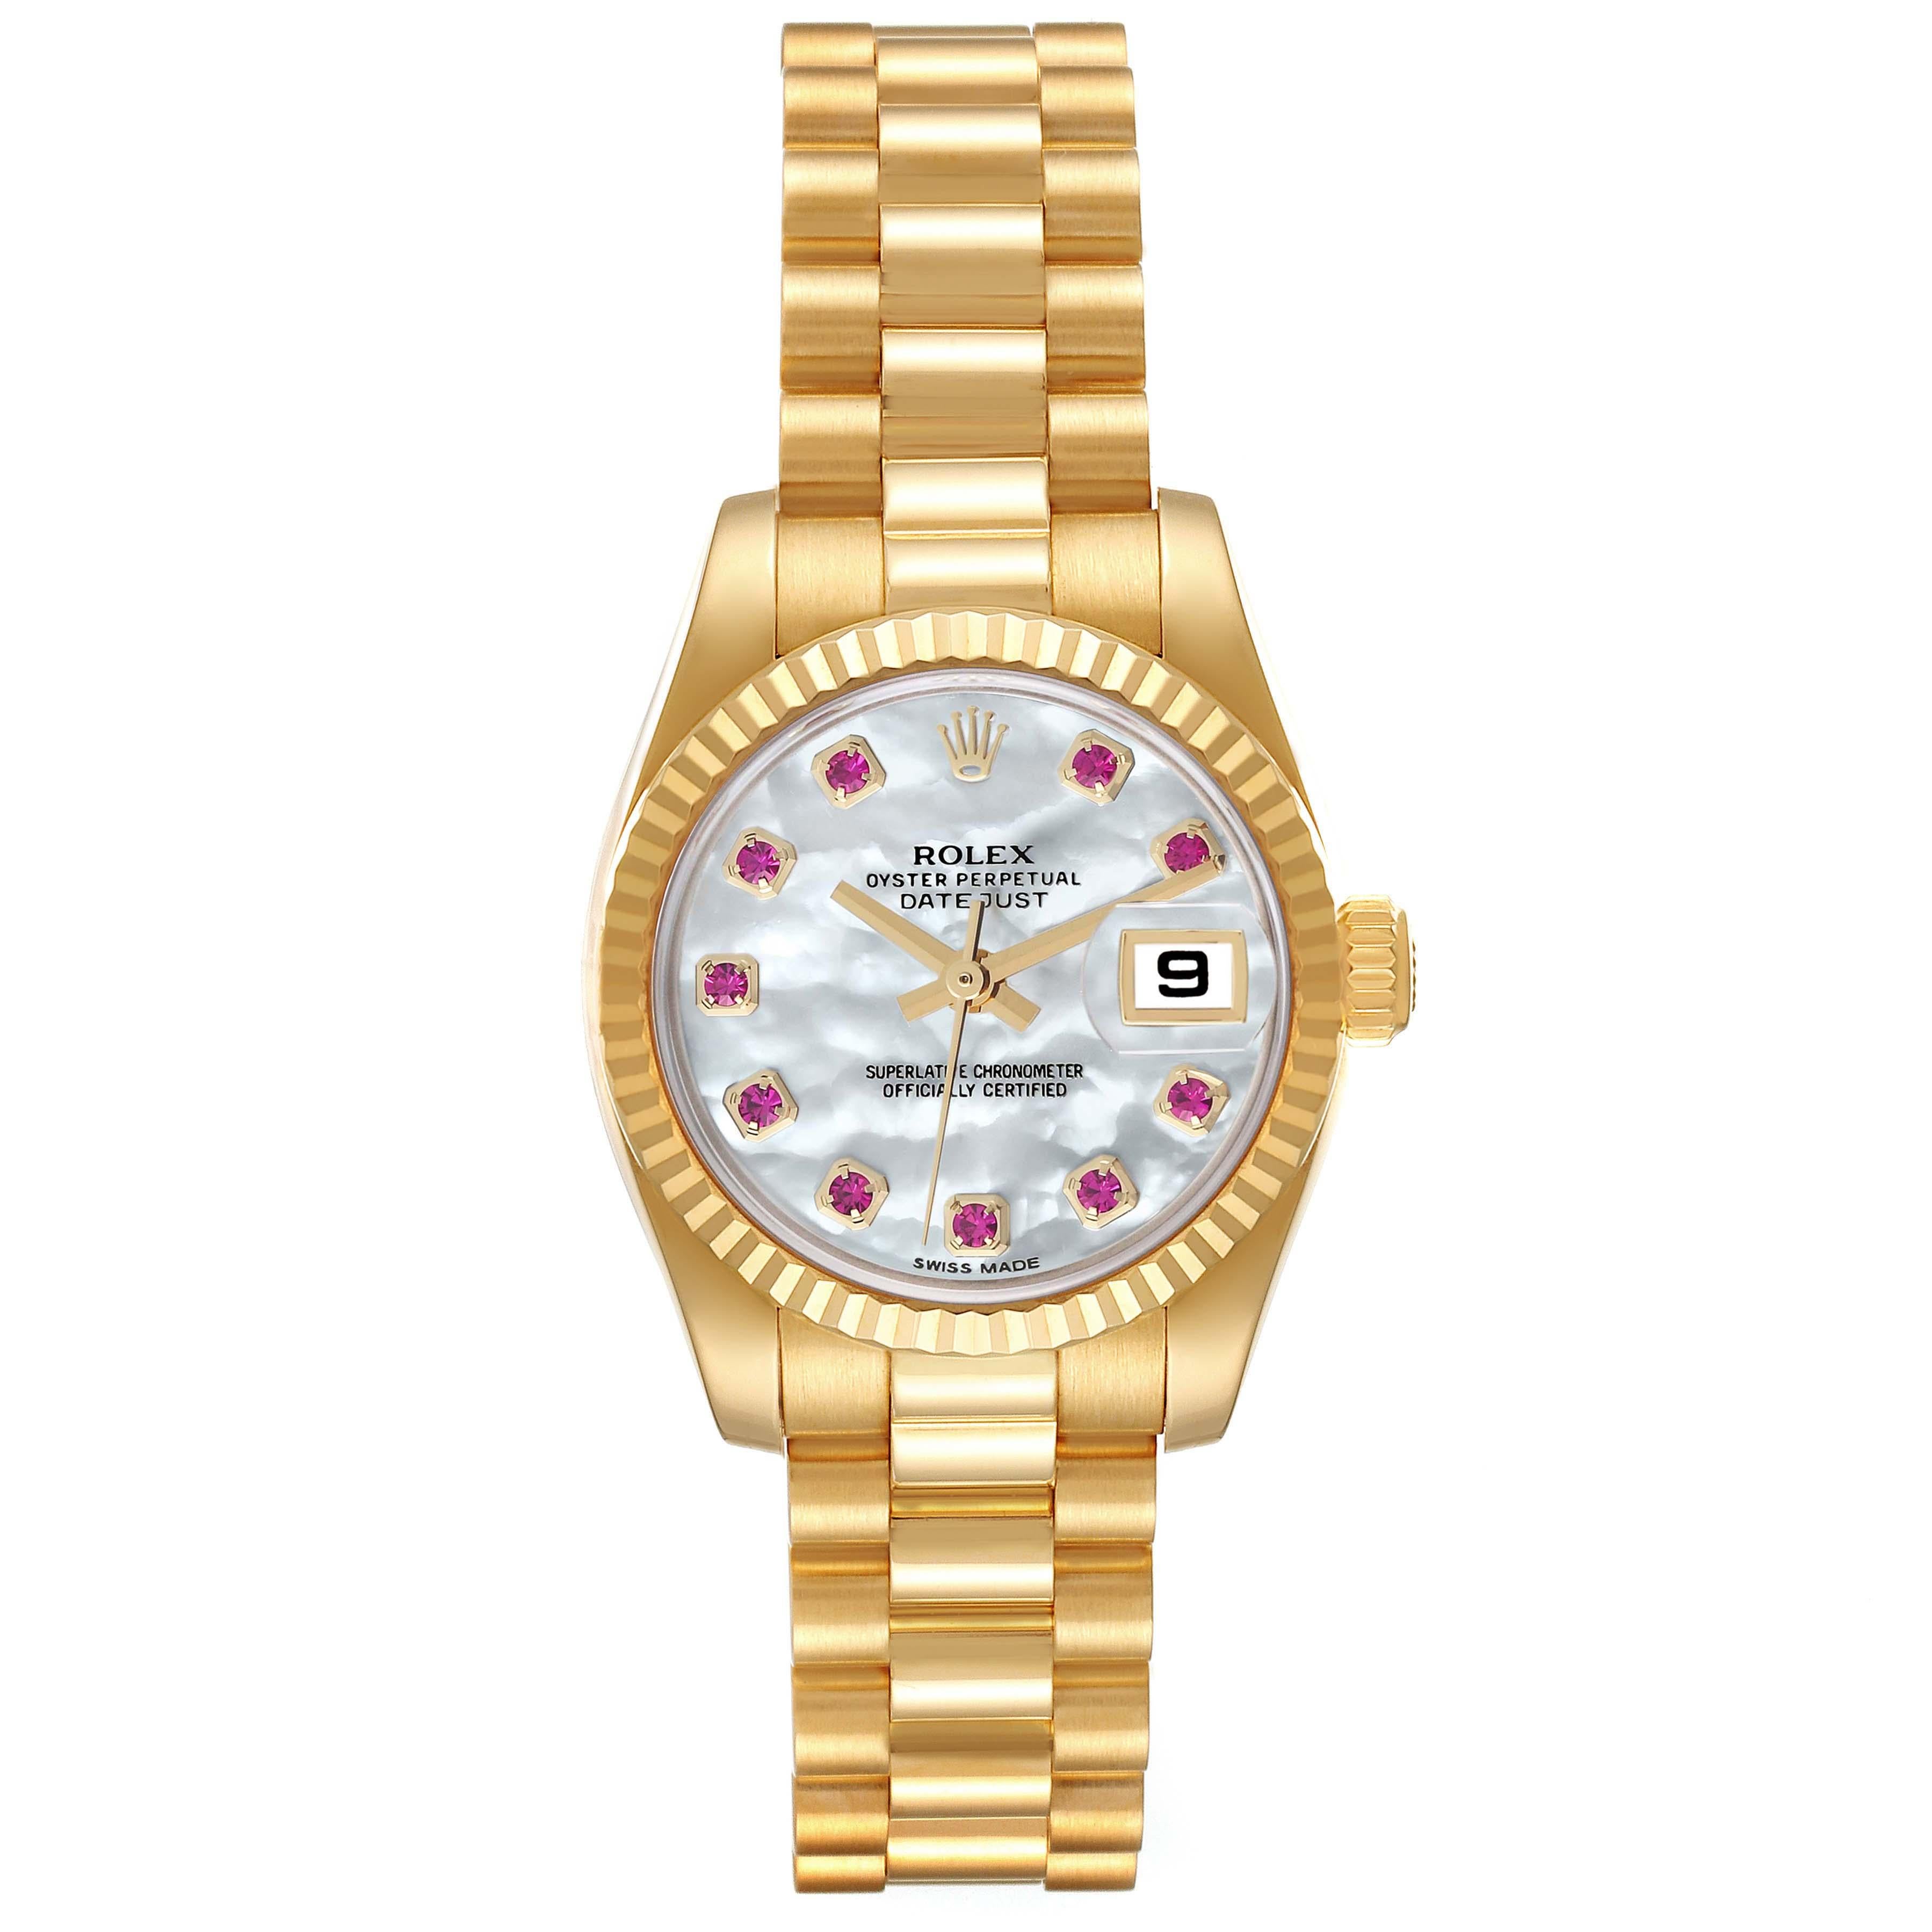 Rolex President Yellow Gold Mother Of Pearl Ruby Diamond Ladies Watch 179178. Officially certified chronometer self-winding movement. 18k yellow gold oyster case 26.0 mm in diameter. Rolex logo on a crown. 18k yellow gold fluted bezel. Scratch